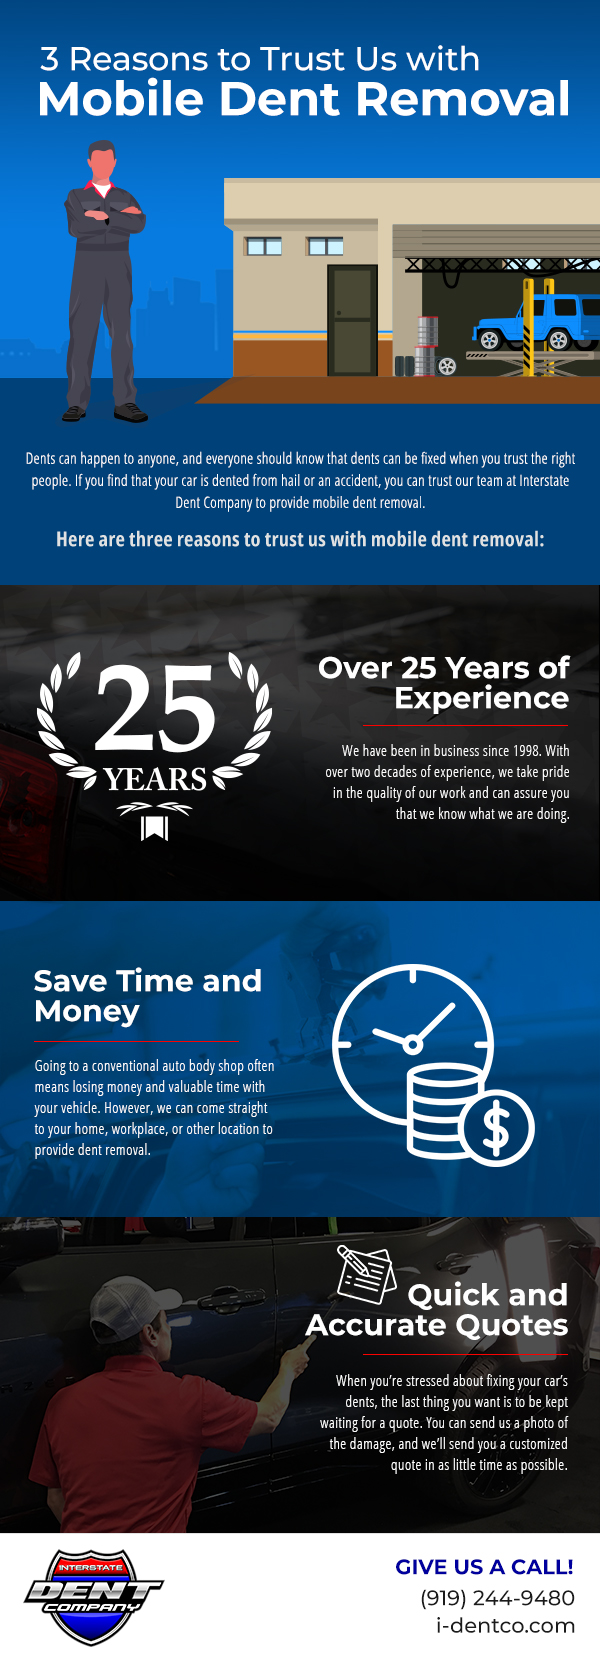 3 Reasons to Trust Us with Mobile Dent Removal [infographic]